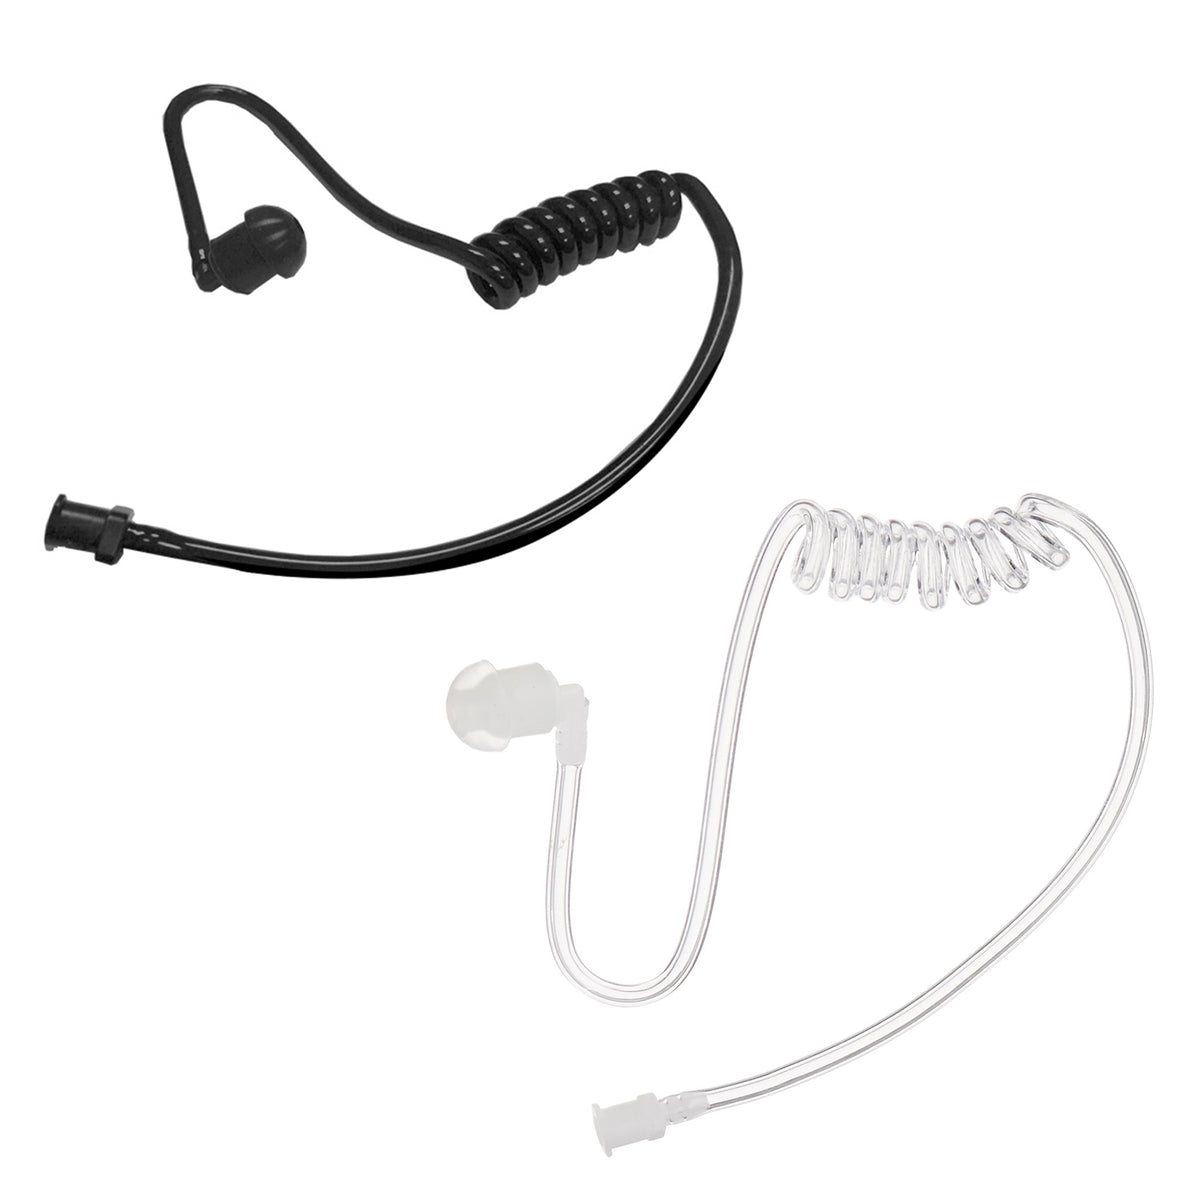  ONE2MAX Acoustic Ear Tube Earpiece Replacement - Air